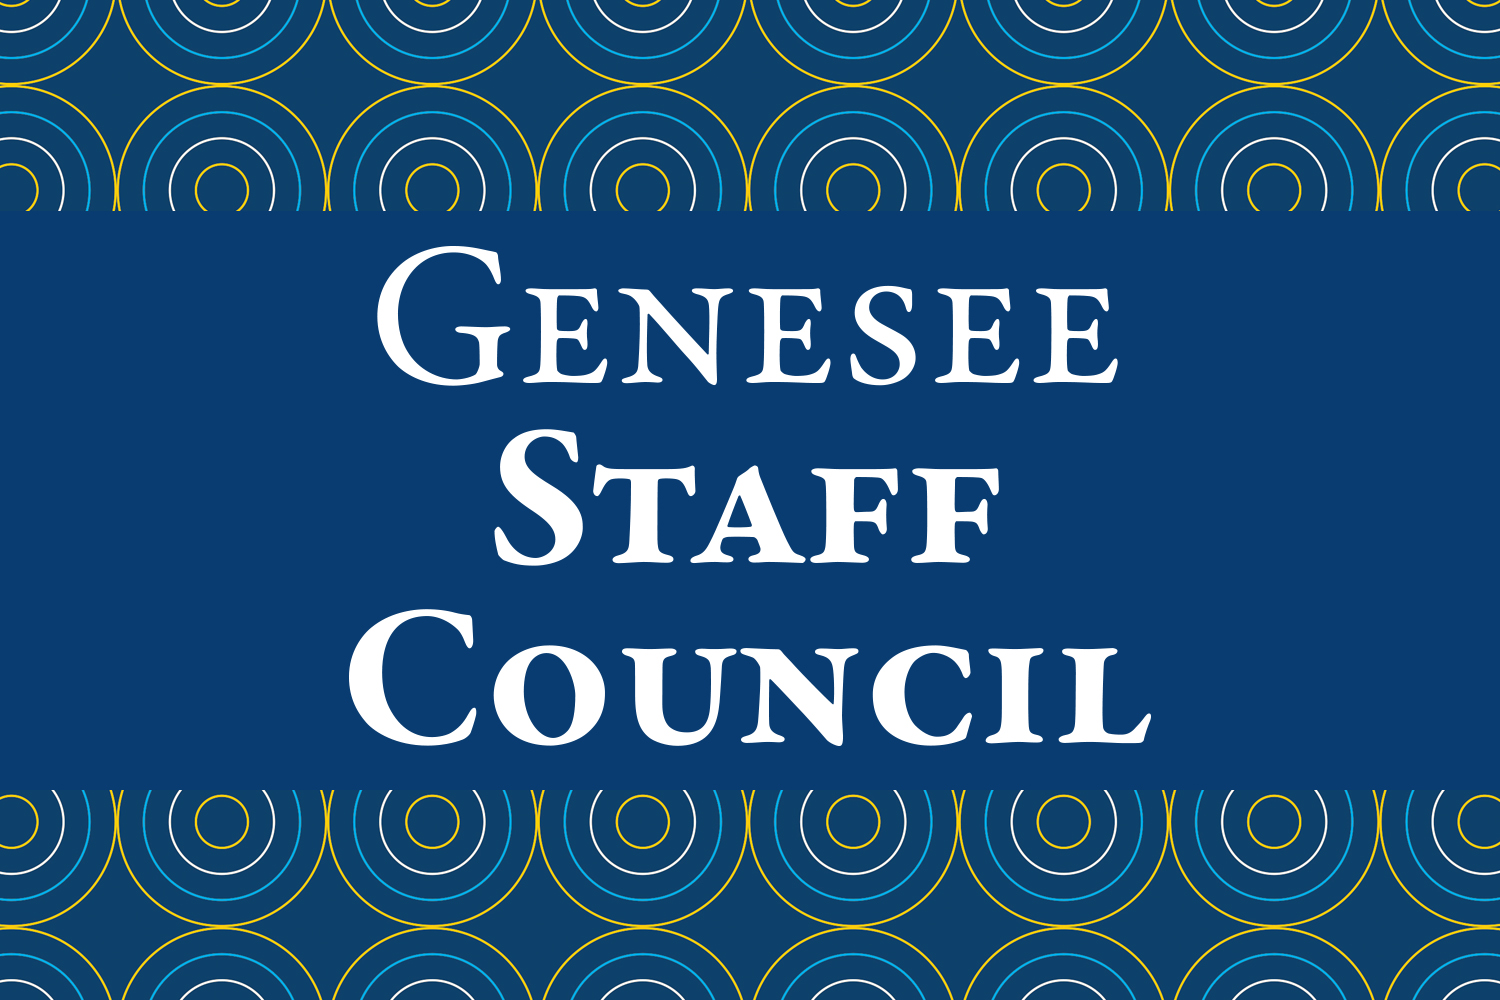 Genesee Staff Council written on blue background.